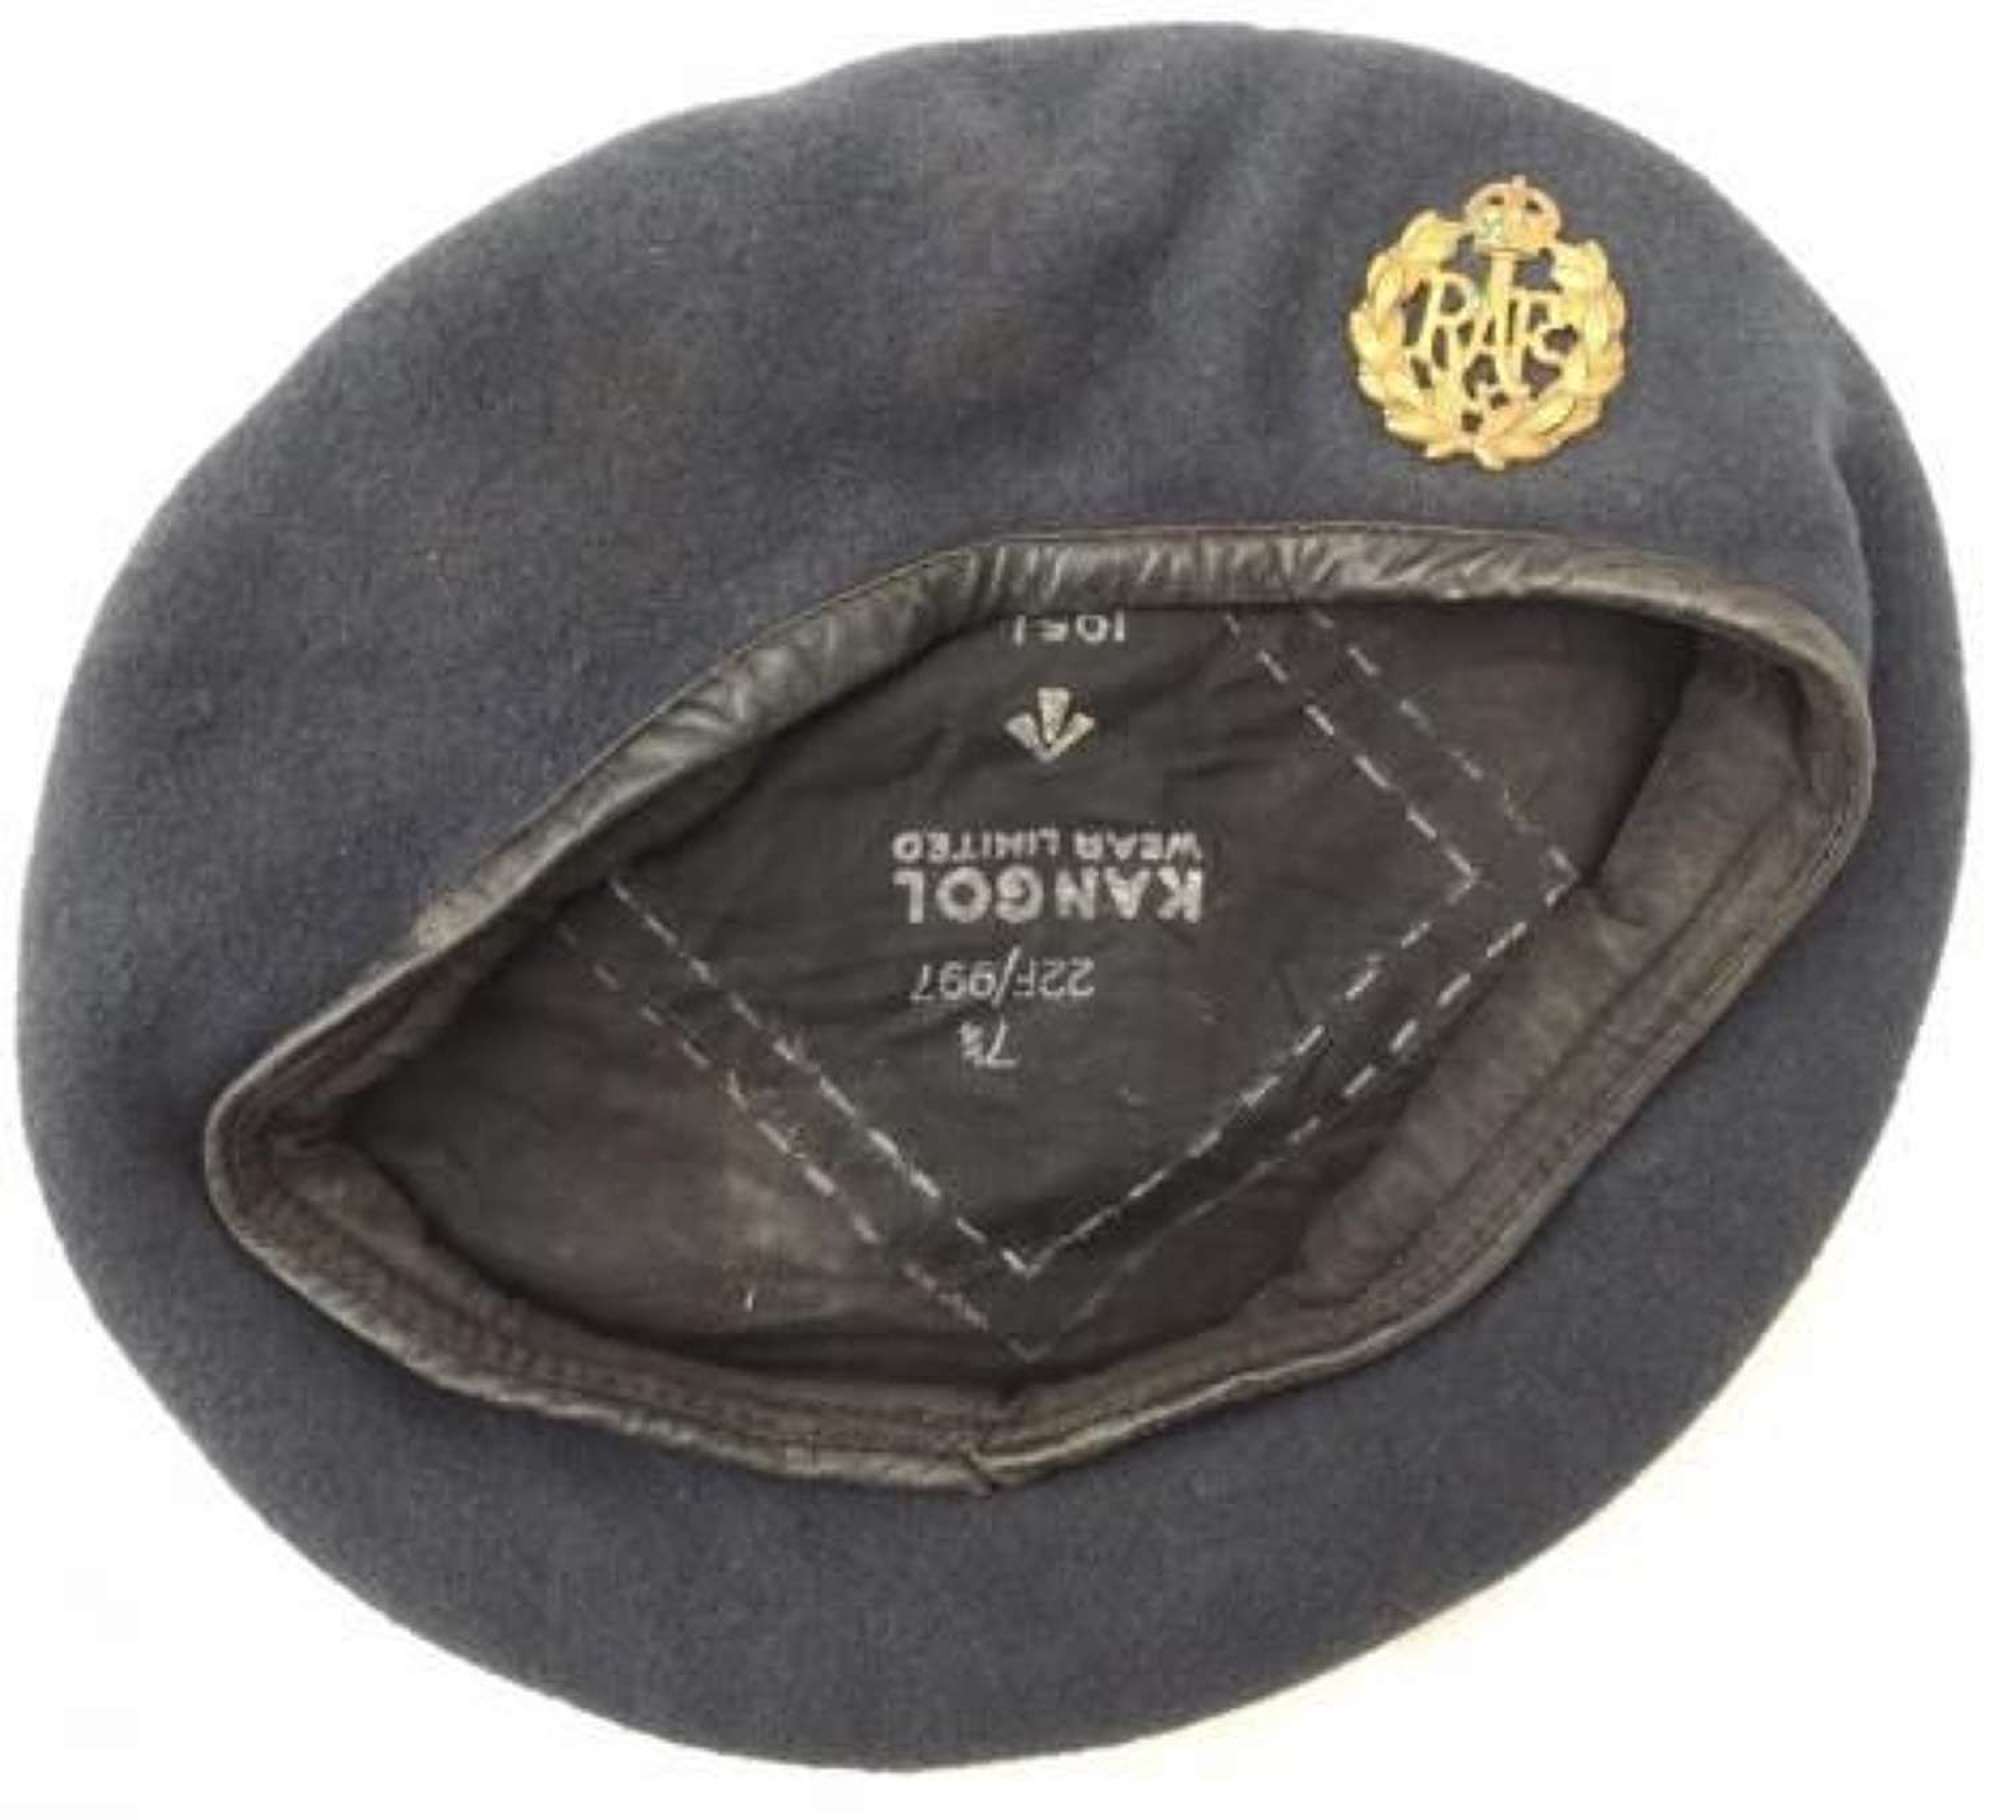 1951 Dated RAF beret - Size 7 1/4